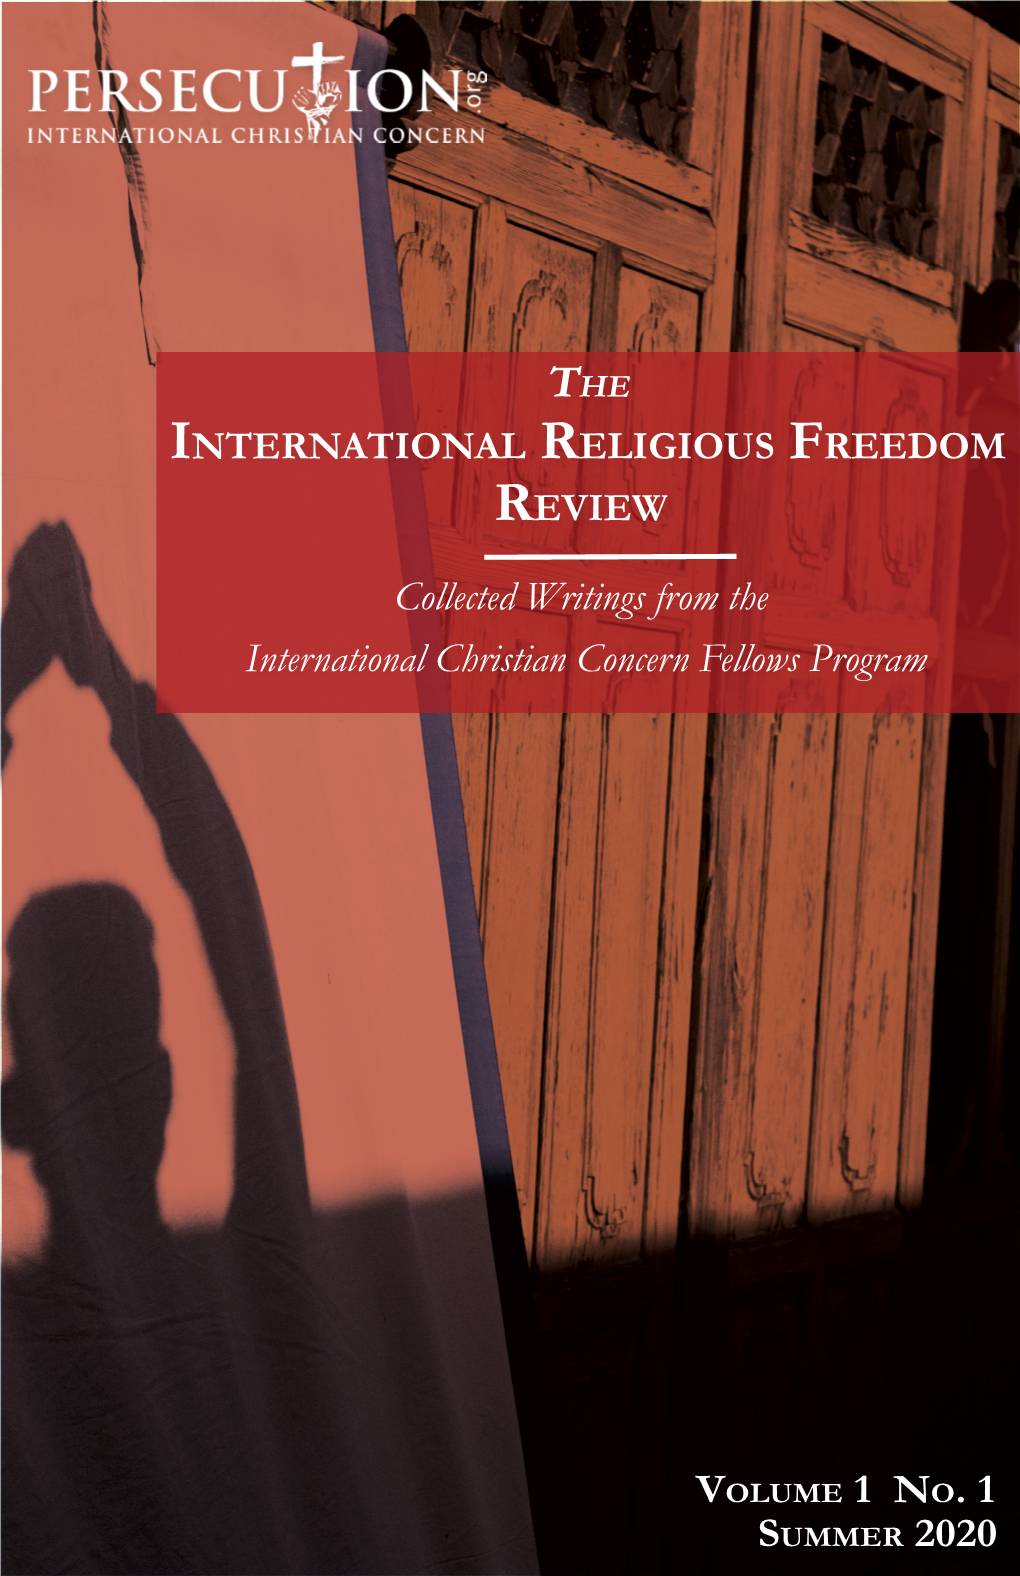 Collected Writings from the International Christian Concern Fellows Program